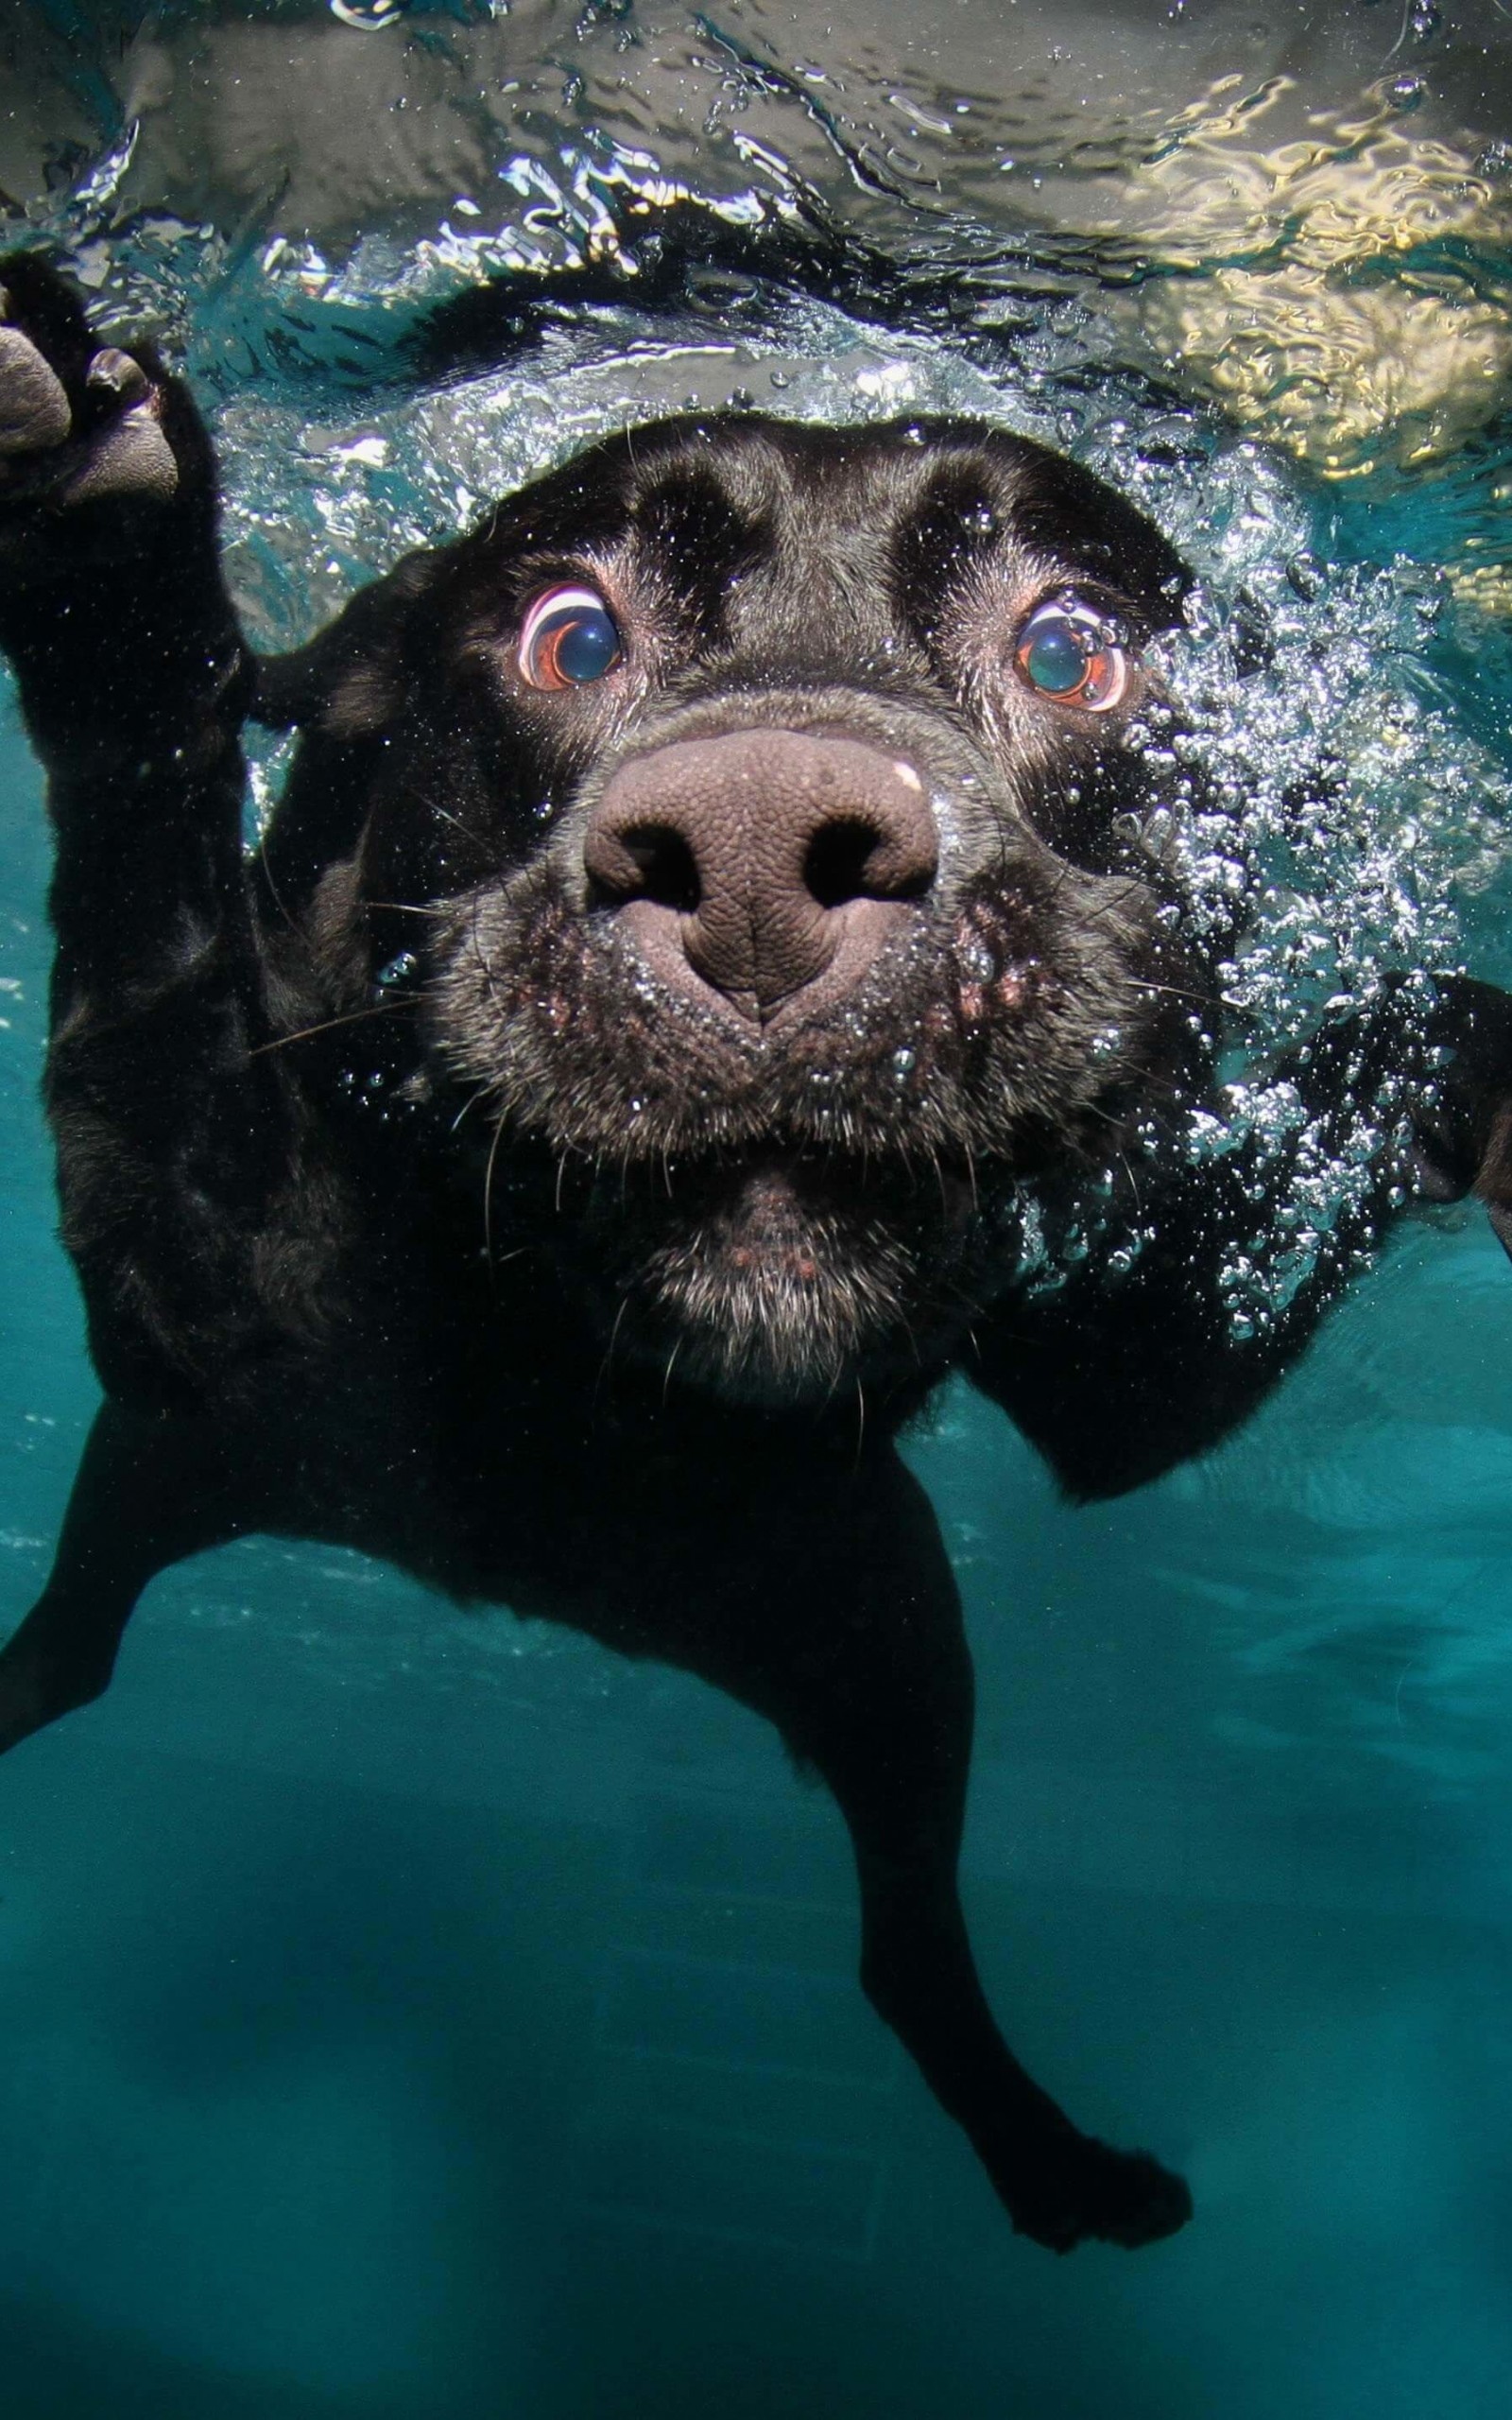 Underwater Dog Wallpaper for Amazon Kindle Fire HDX 8.9